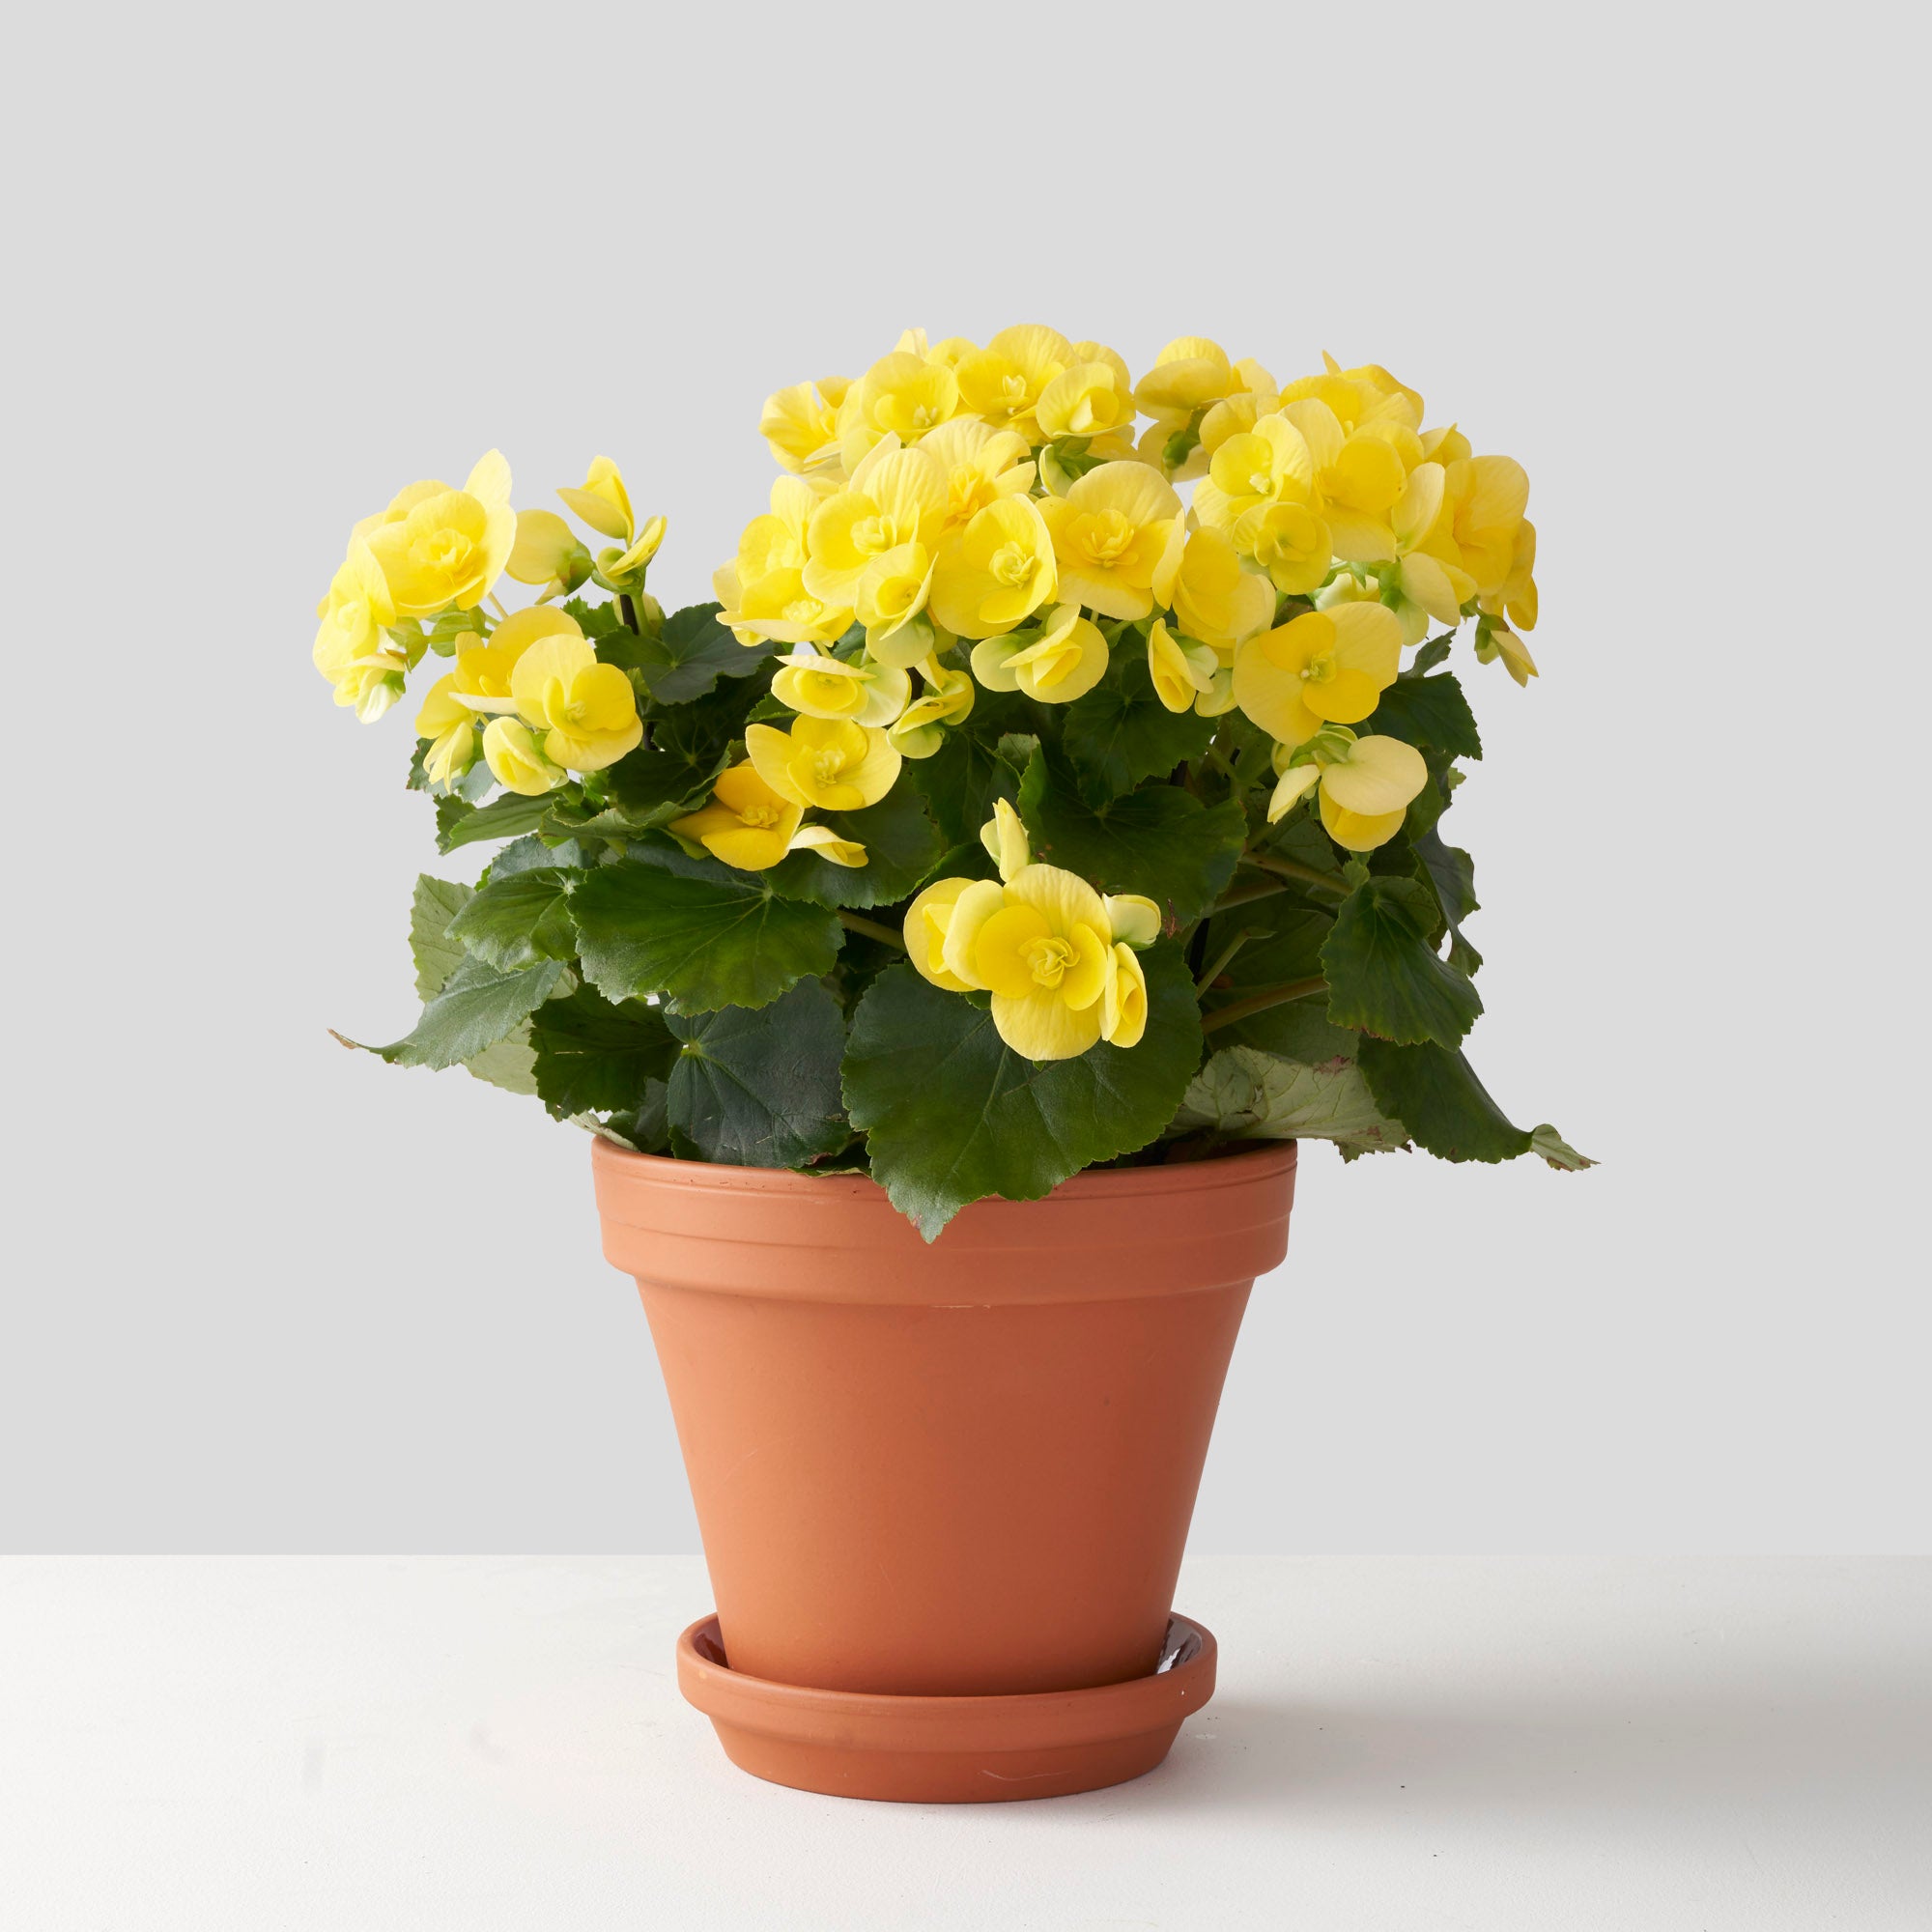 Yello begonia plant in flower in clay pot on white background.